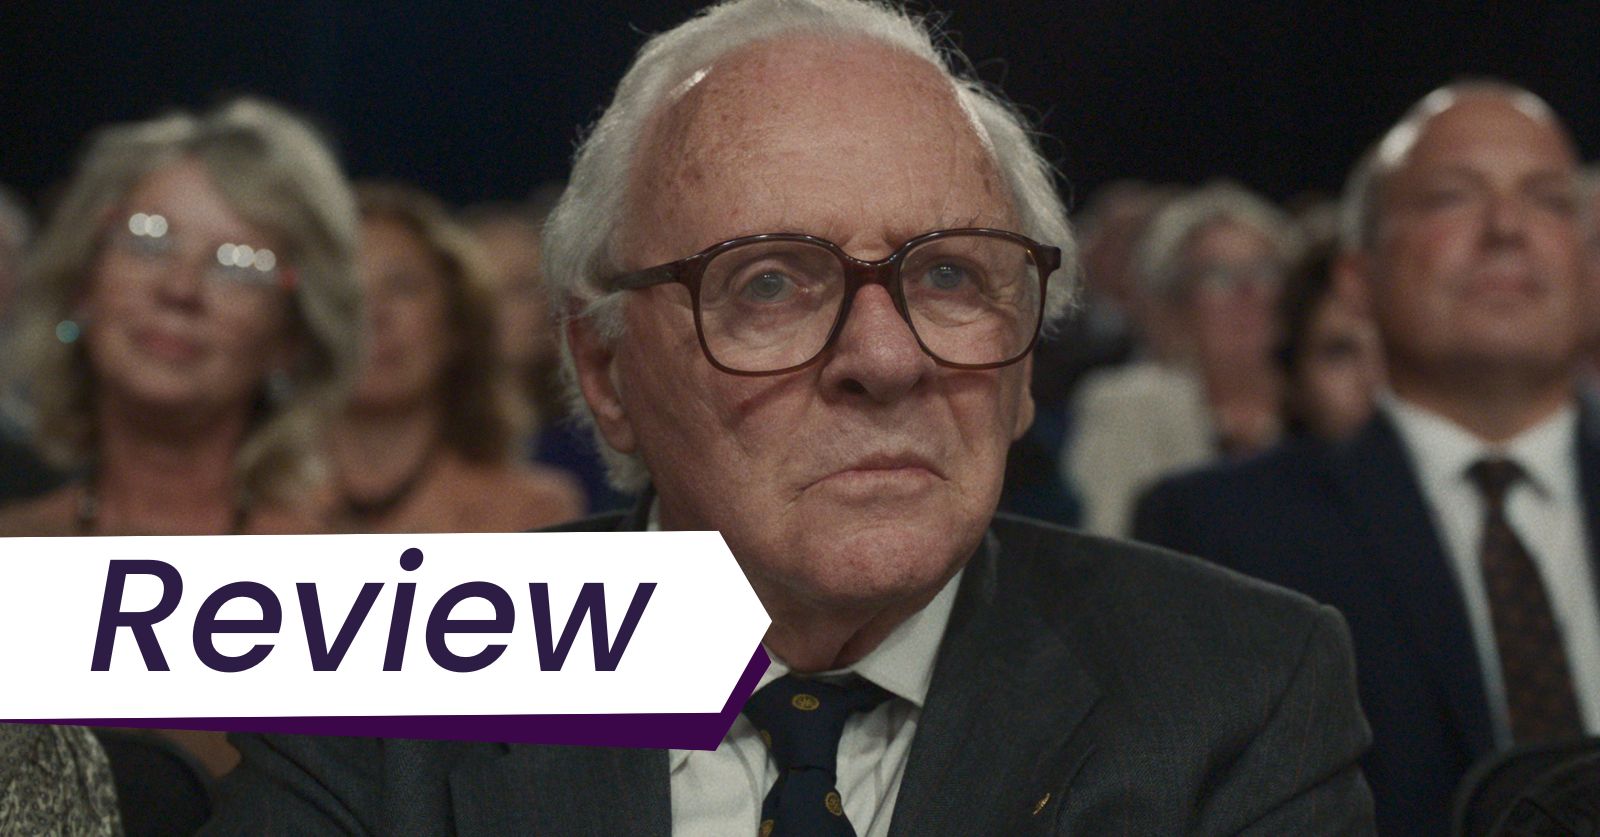 Still of Anthony Hopkins as Nicholas Winton in James Hawes's One Life. Photo courtesy of Bleeker Street Films. An elderly white man with white hair and glasses wearing a suit sits at the front of an audience in James Hawes's One Life.